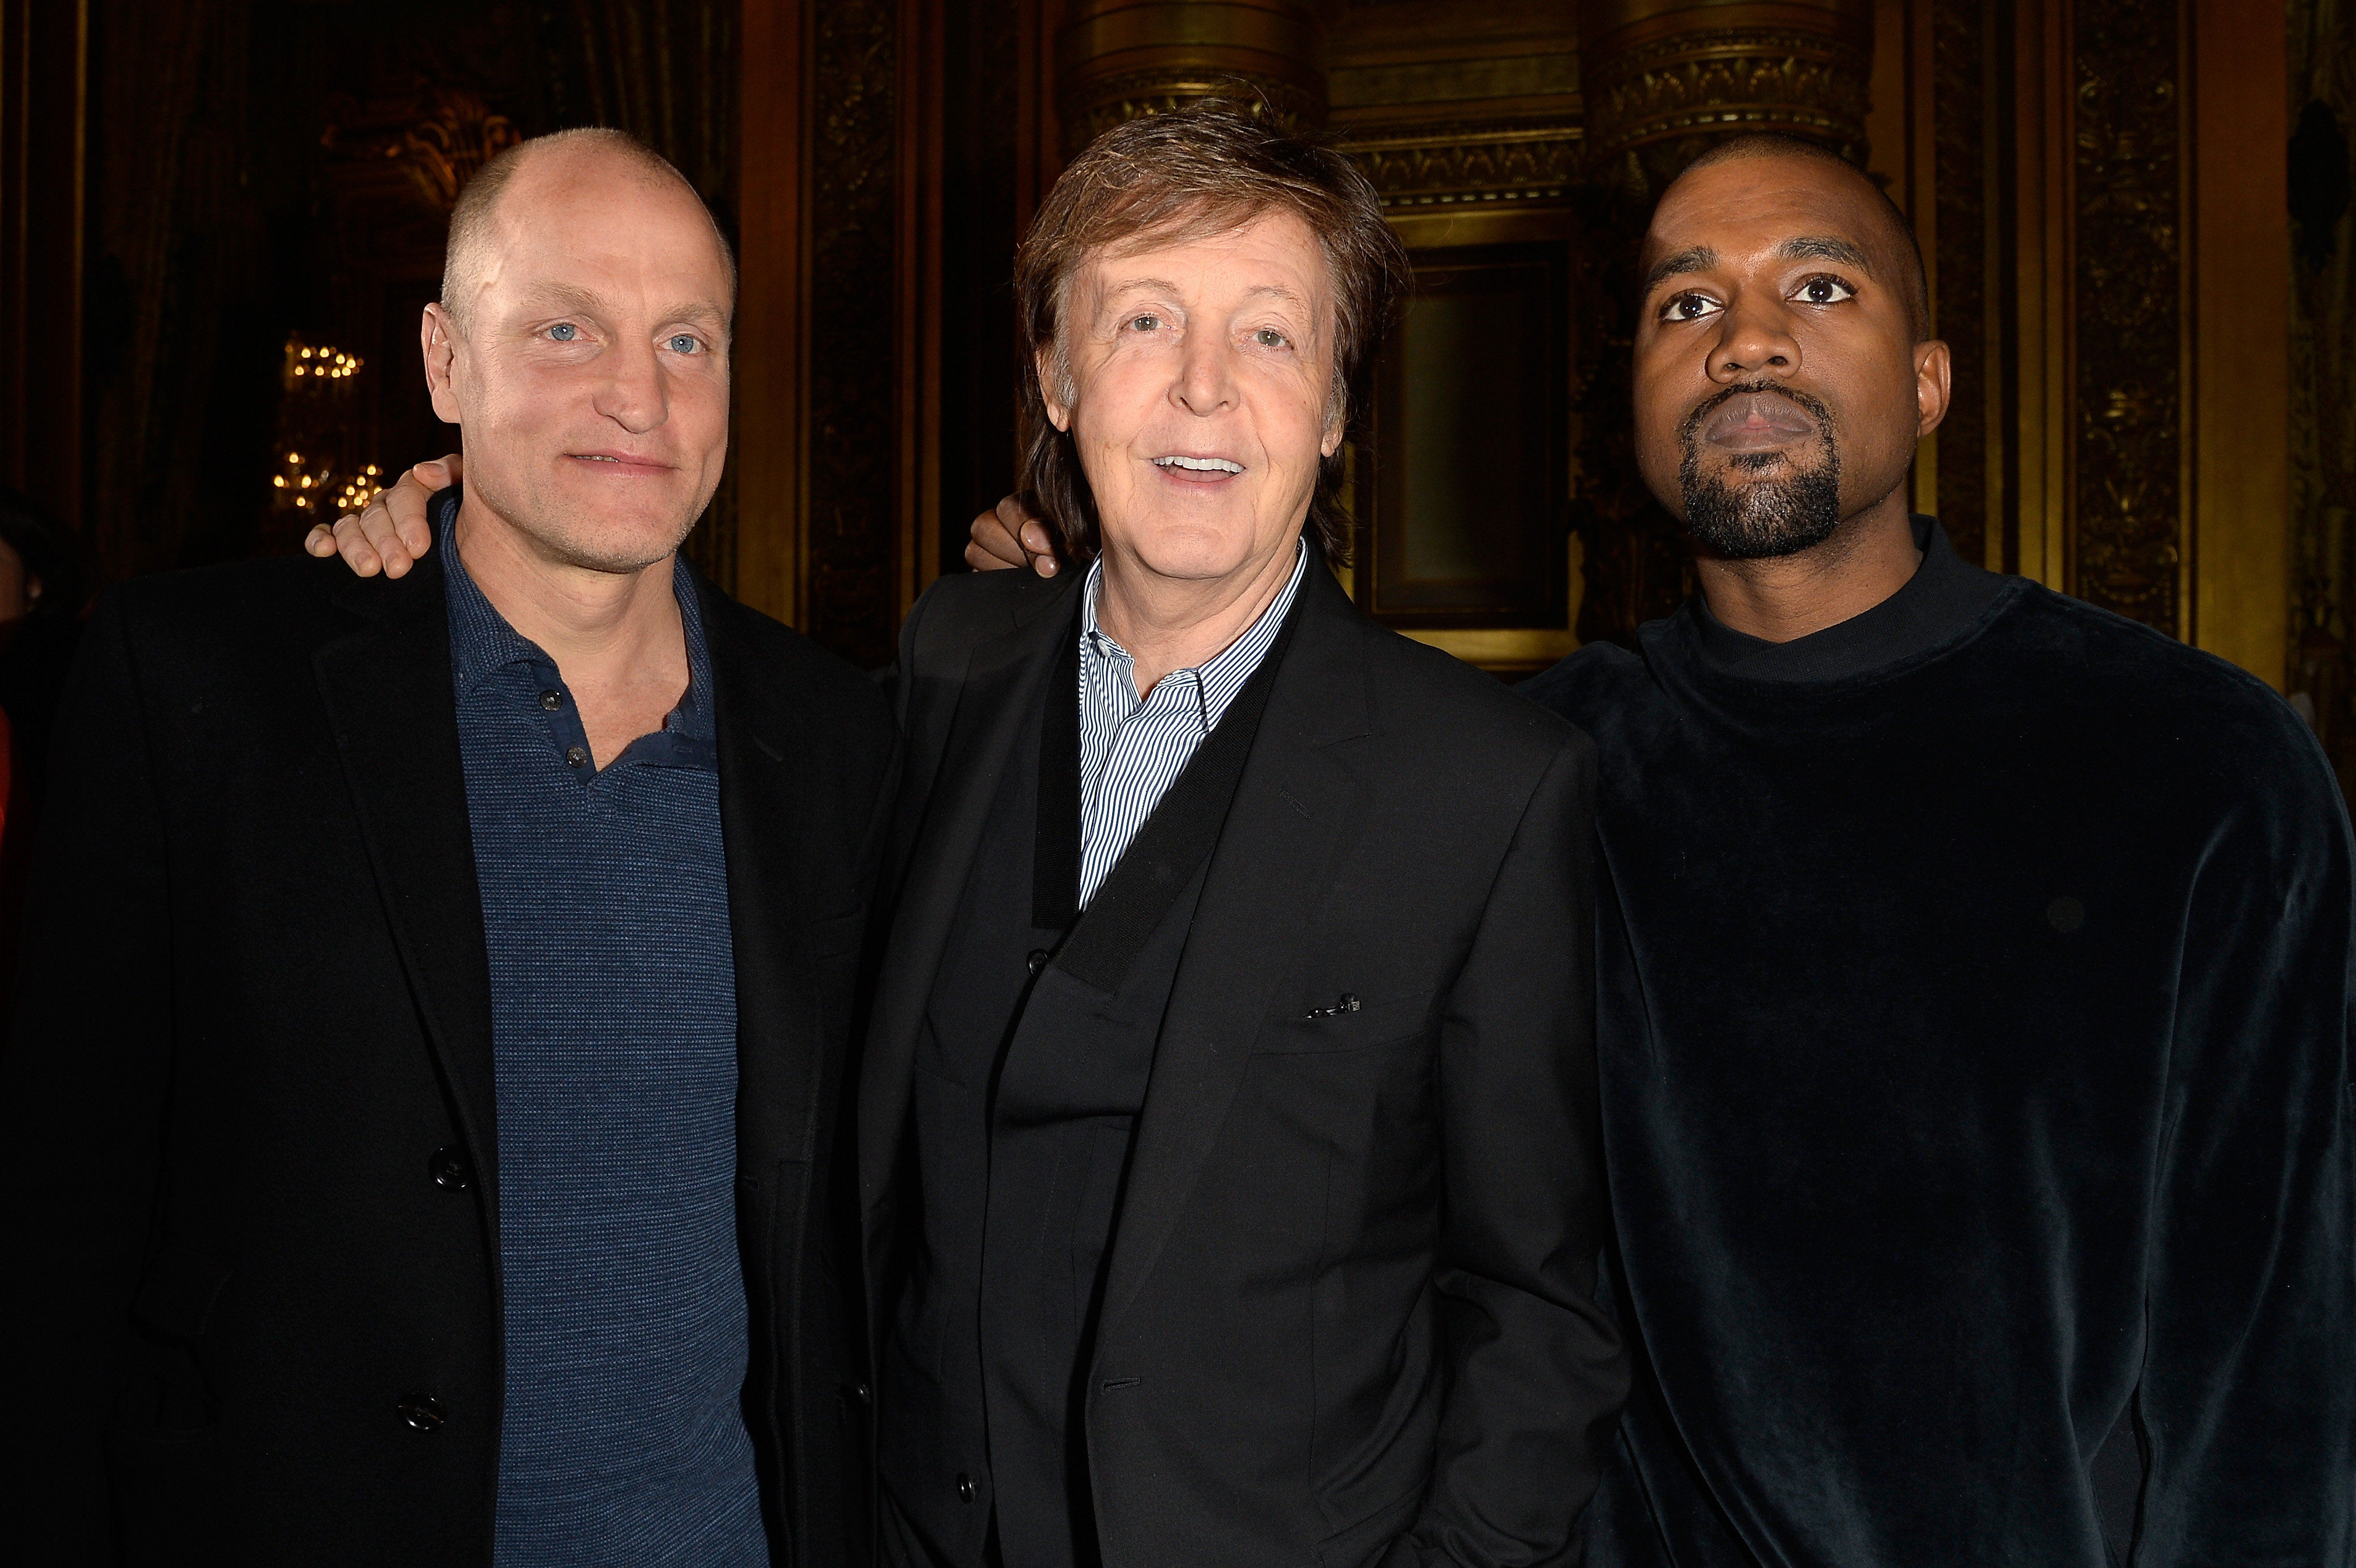 Woody Harrelson, Paul McCartney and Kanye West at the Stella McCartney show (Photo: Getty).